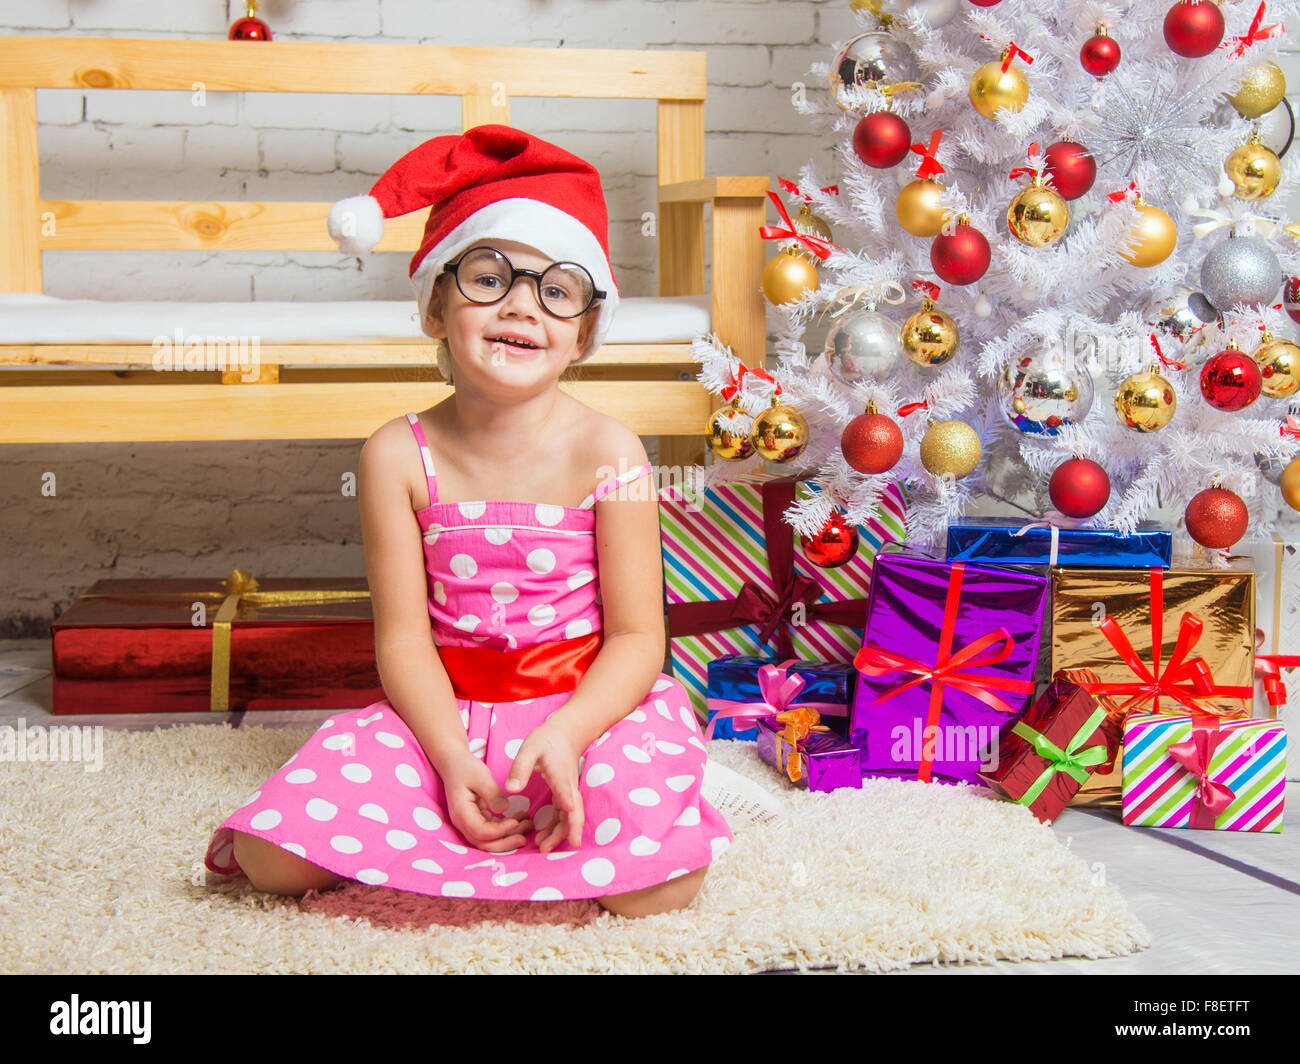 Girl in the red hat and the funny round glasses sits on a rug in the room with New Years interior Stock Photo